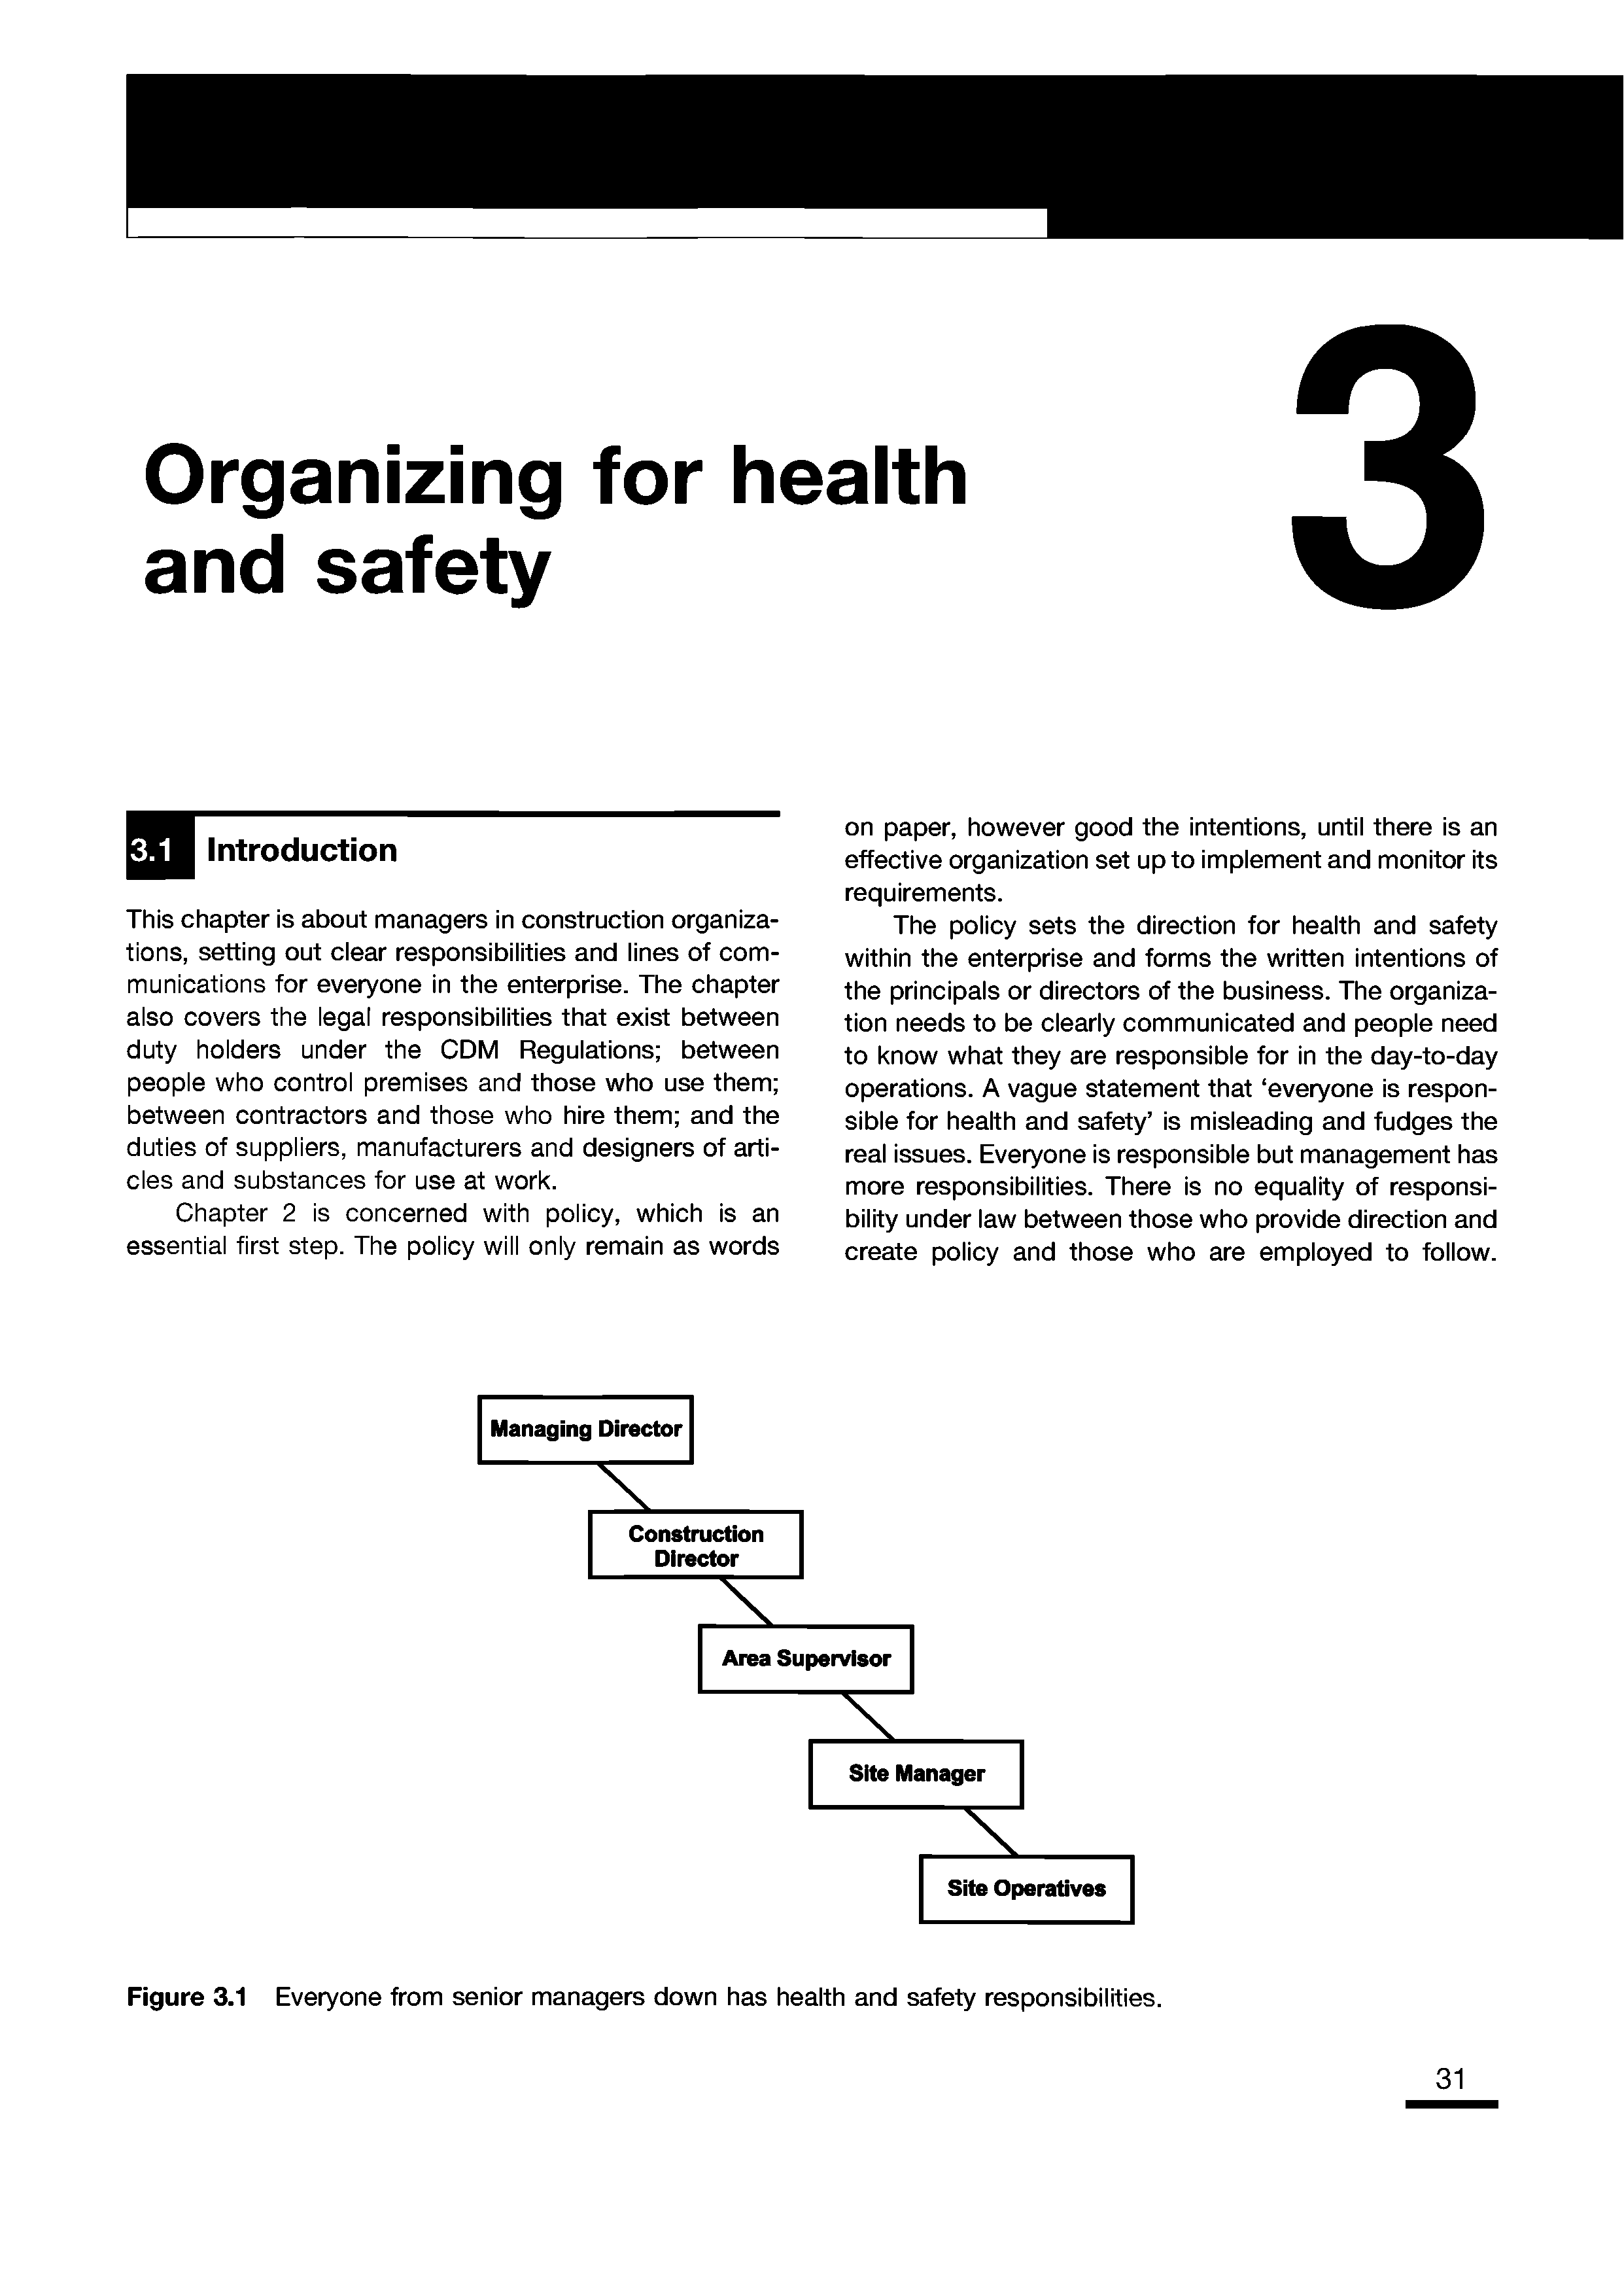 Figure 3.1 Everyone from senior managers down has health and safety responsibilities.